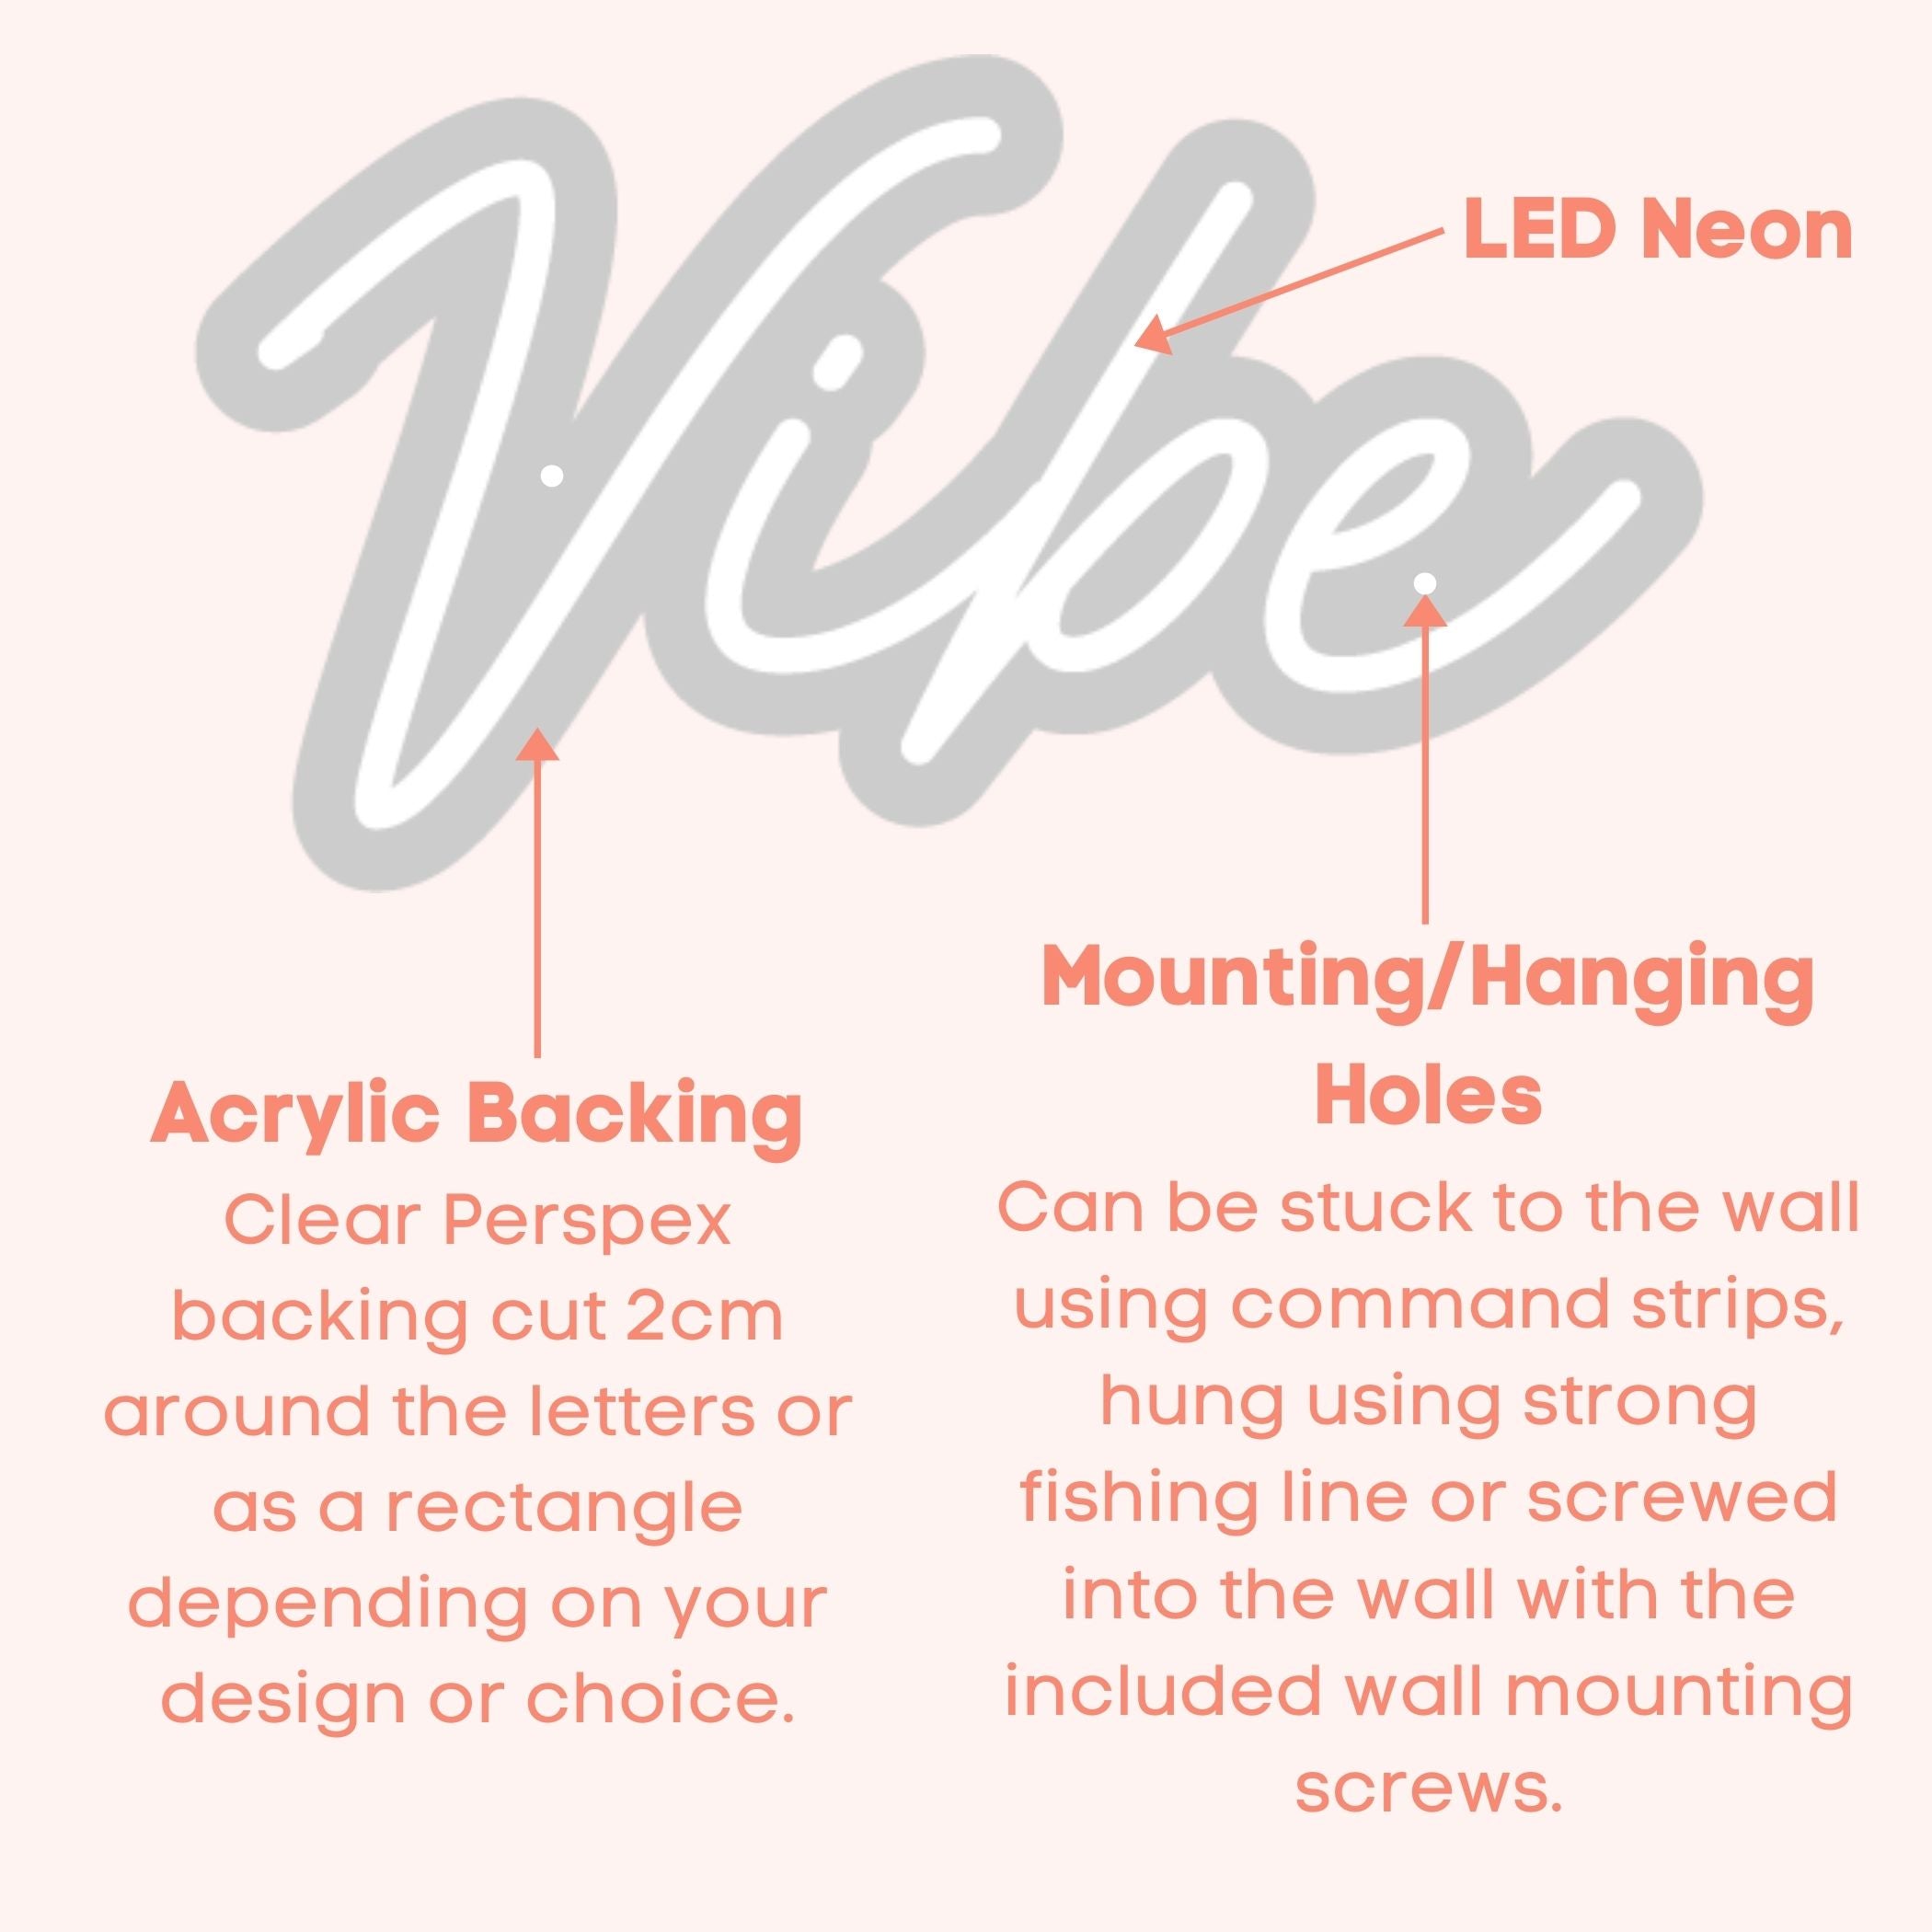 Strictly good vibes Neon Sign Product Explainer